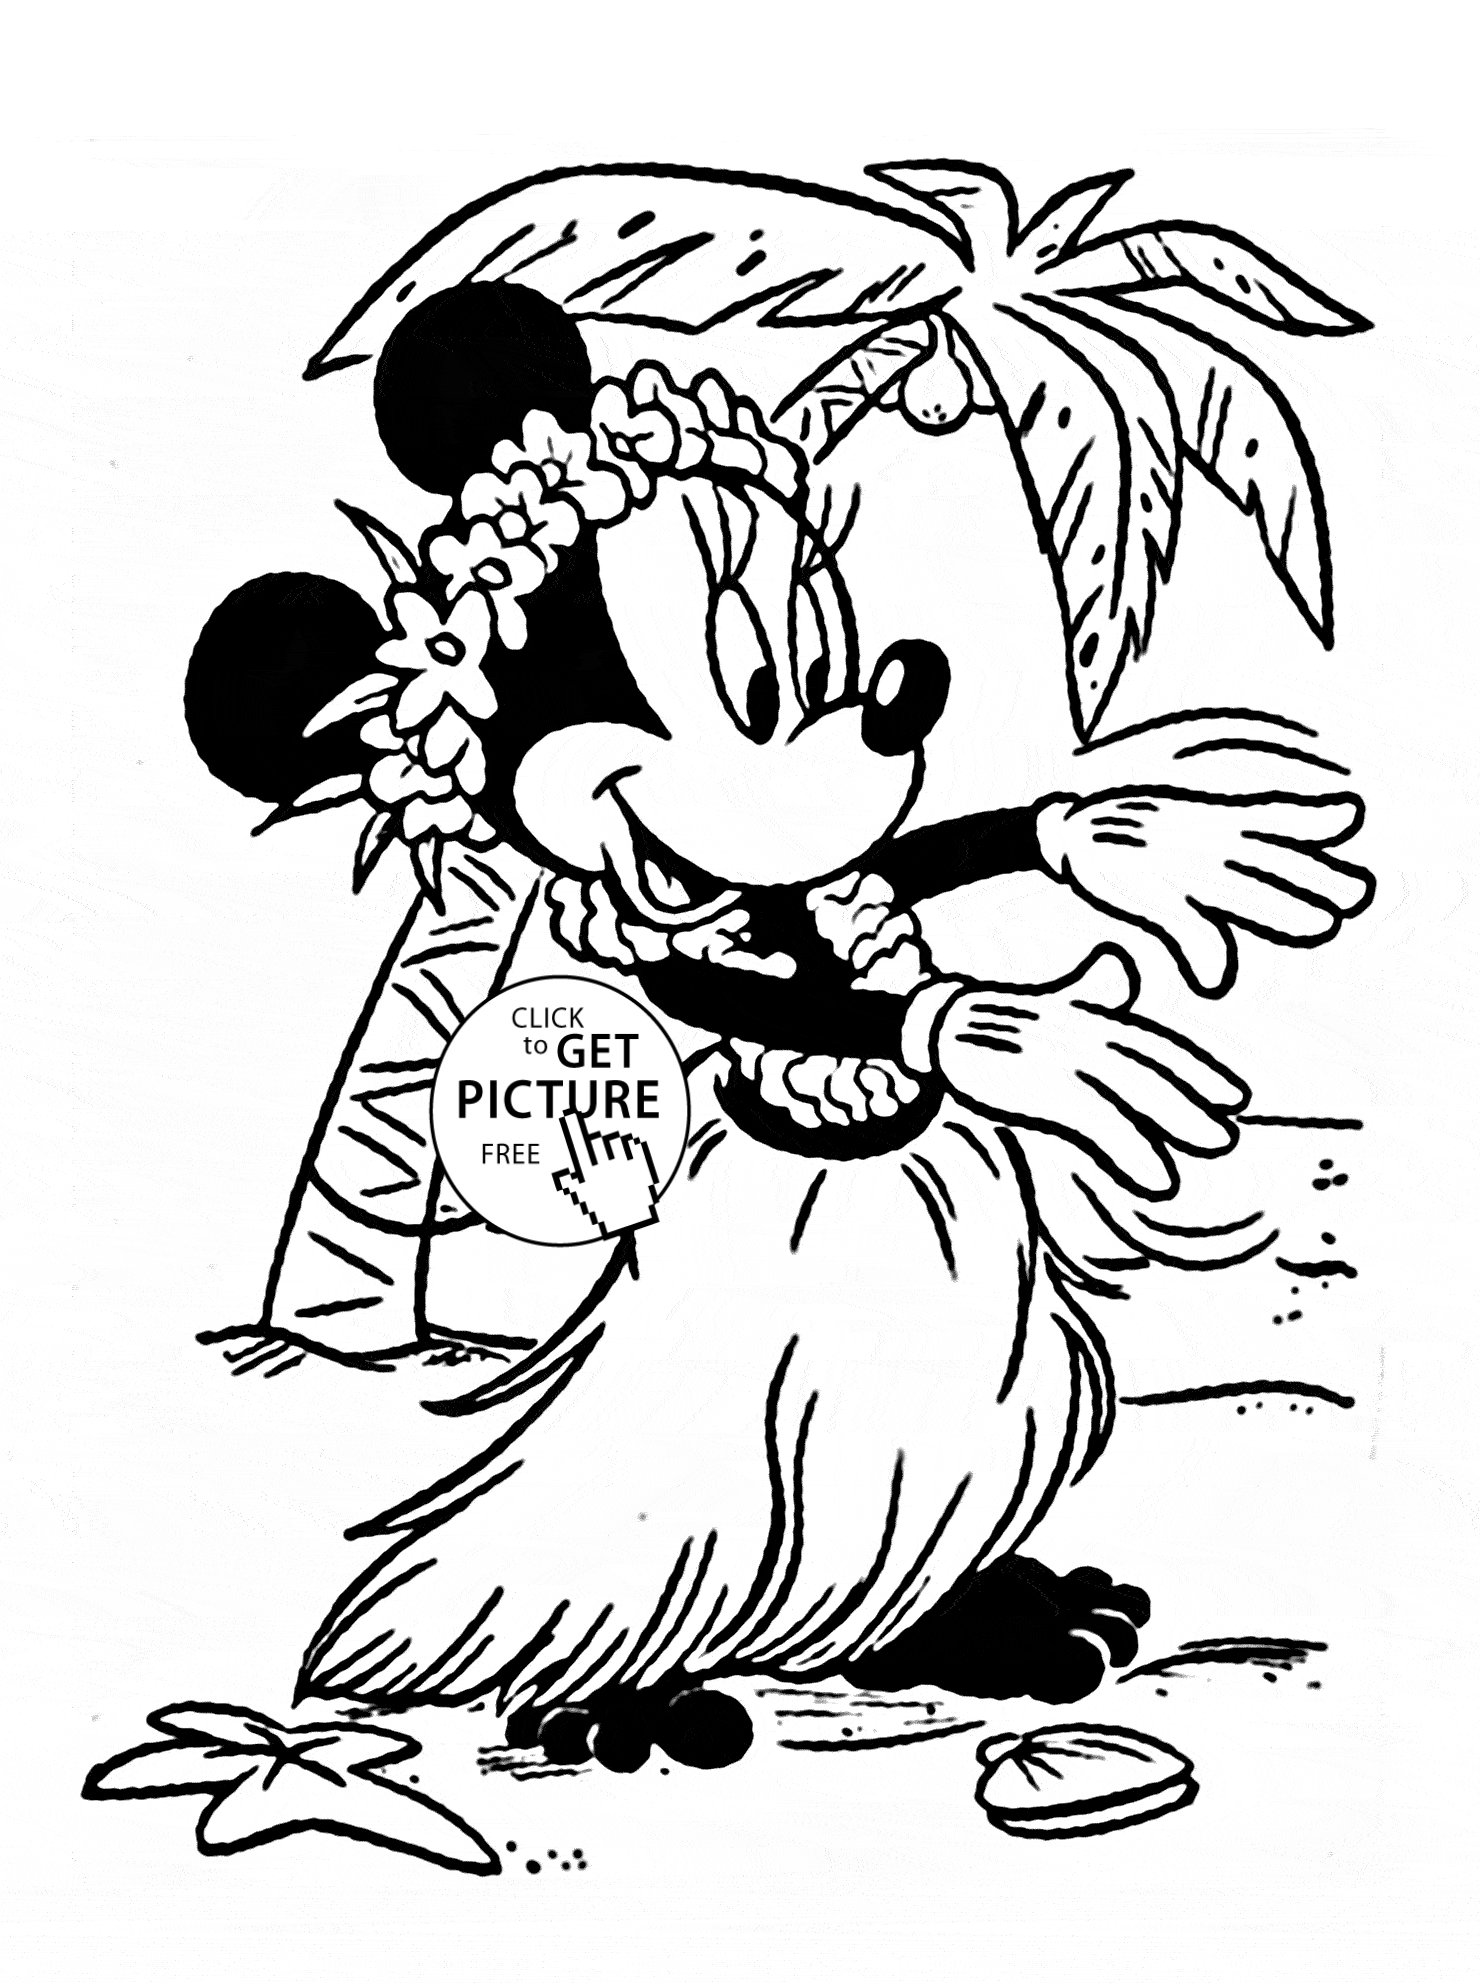 Coloring Pages About Hawaii - Coloring Home